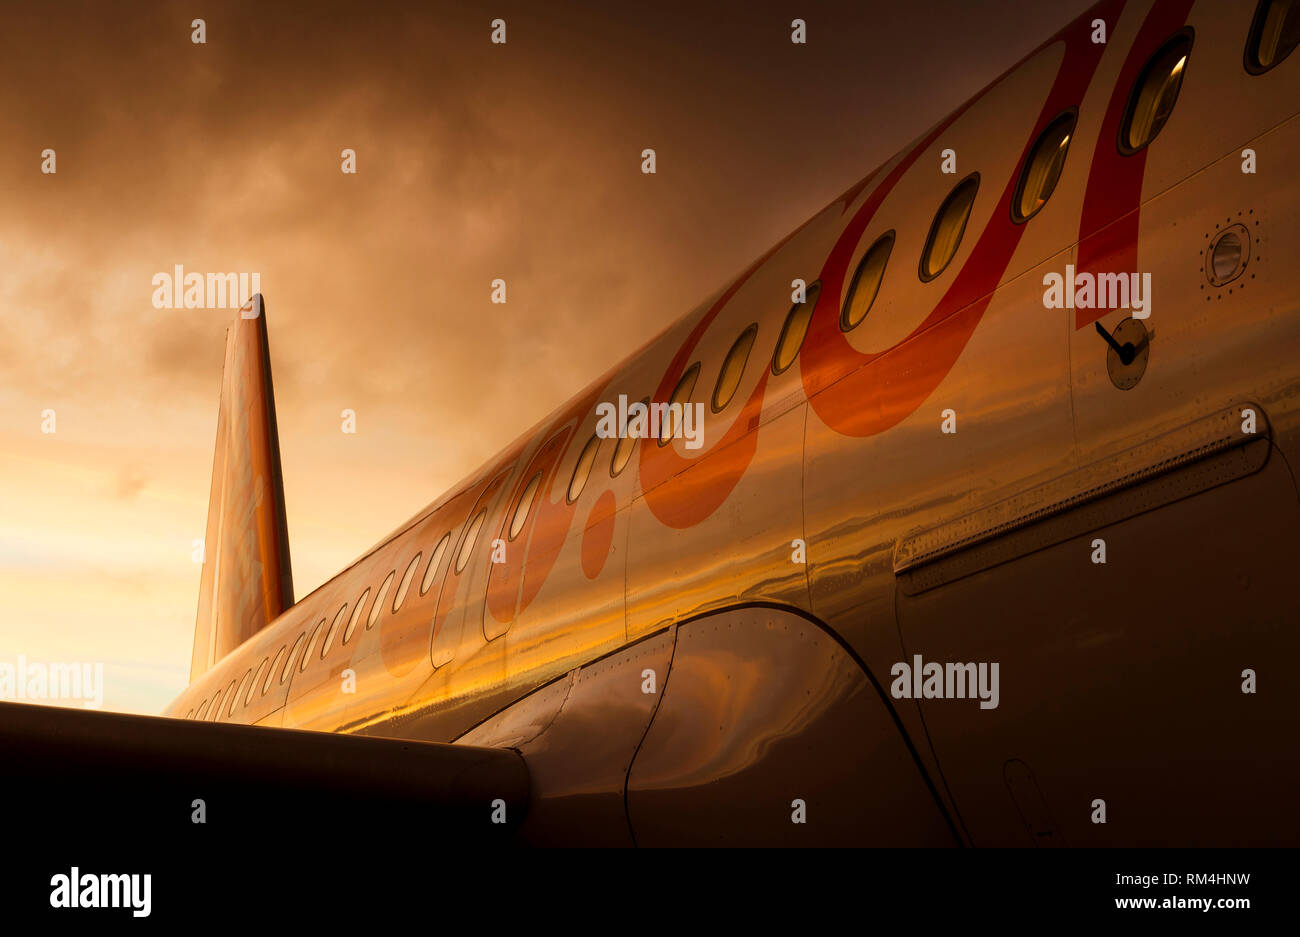 Close up of the tail and emergency exit door of an Easyjet aircraft waiting on the apron at Gatwick Airport at dusk. Stock Photo